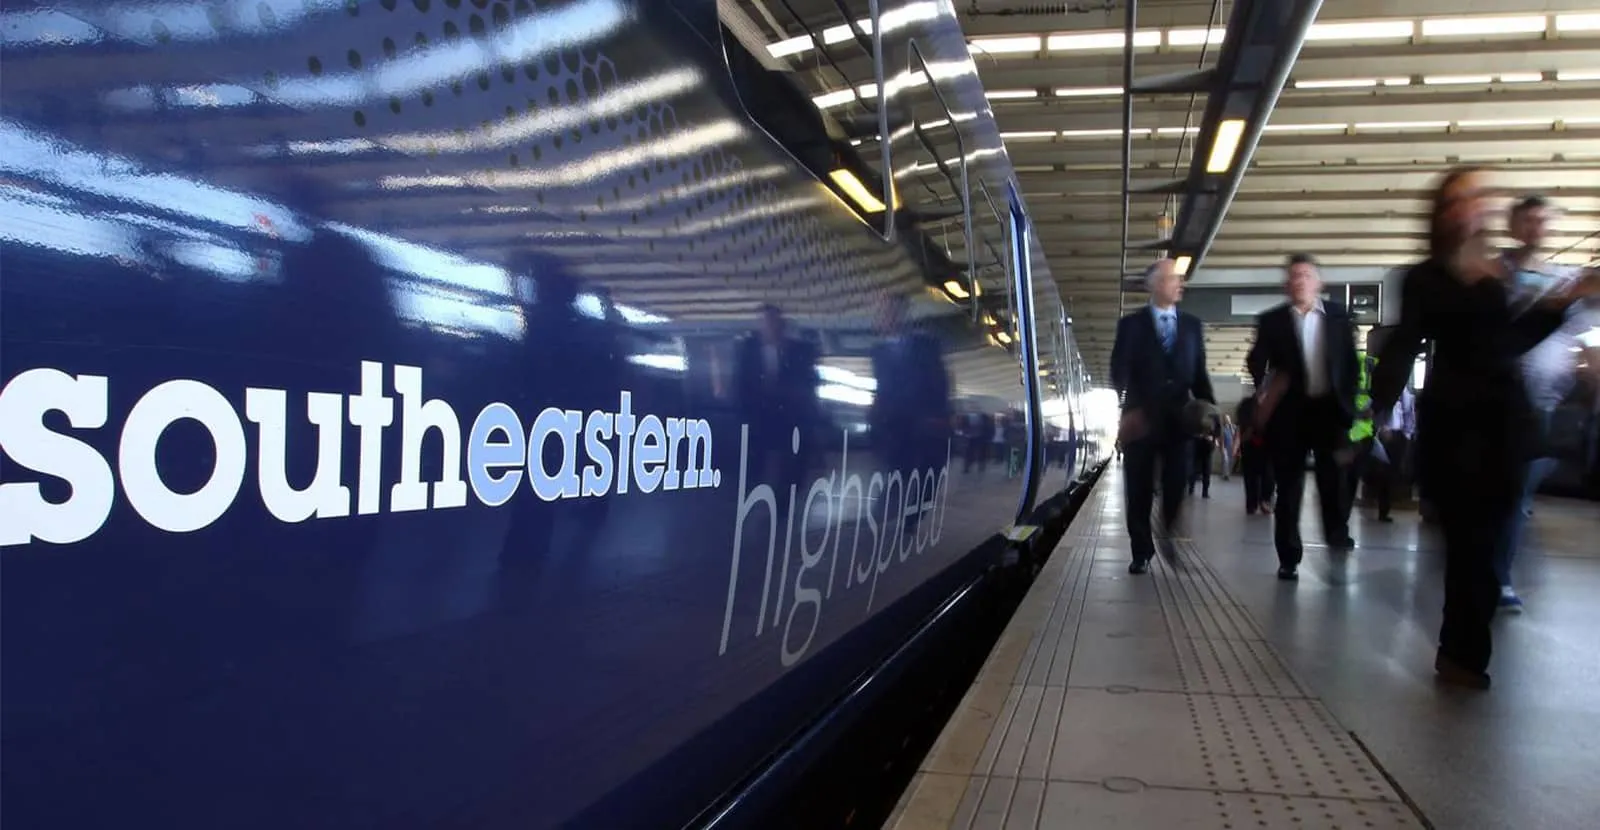 Southeastern Passenger Experience Image